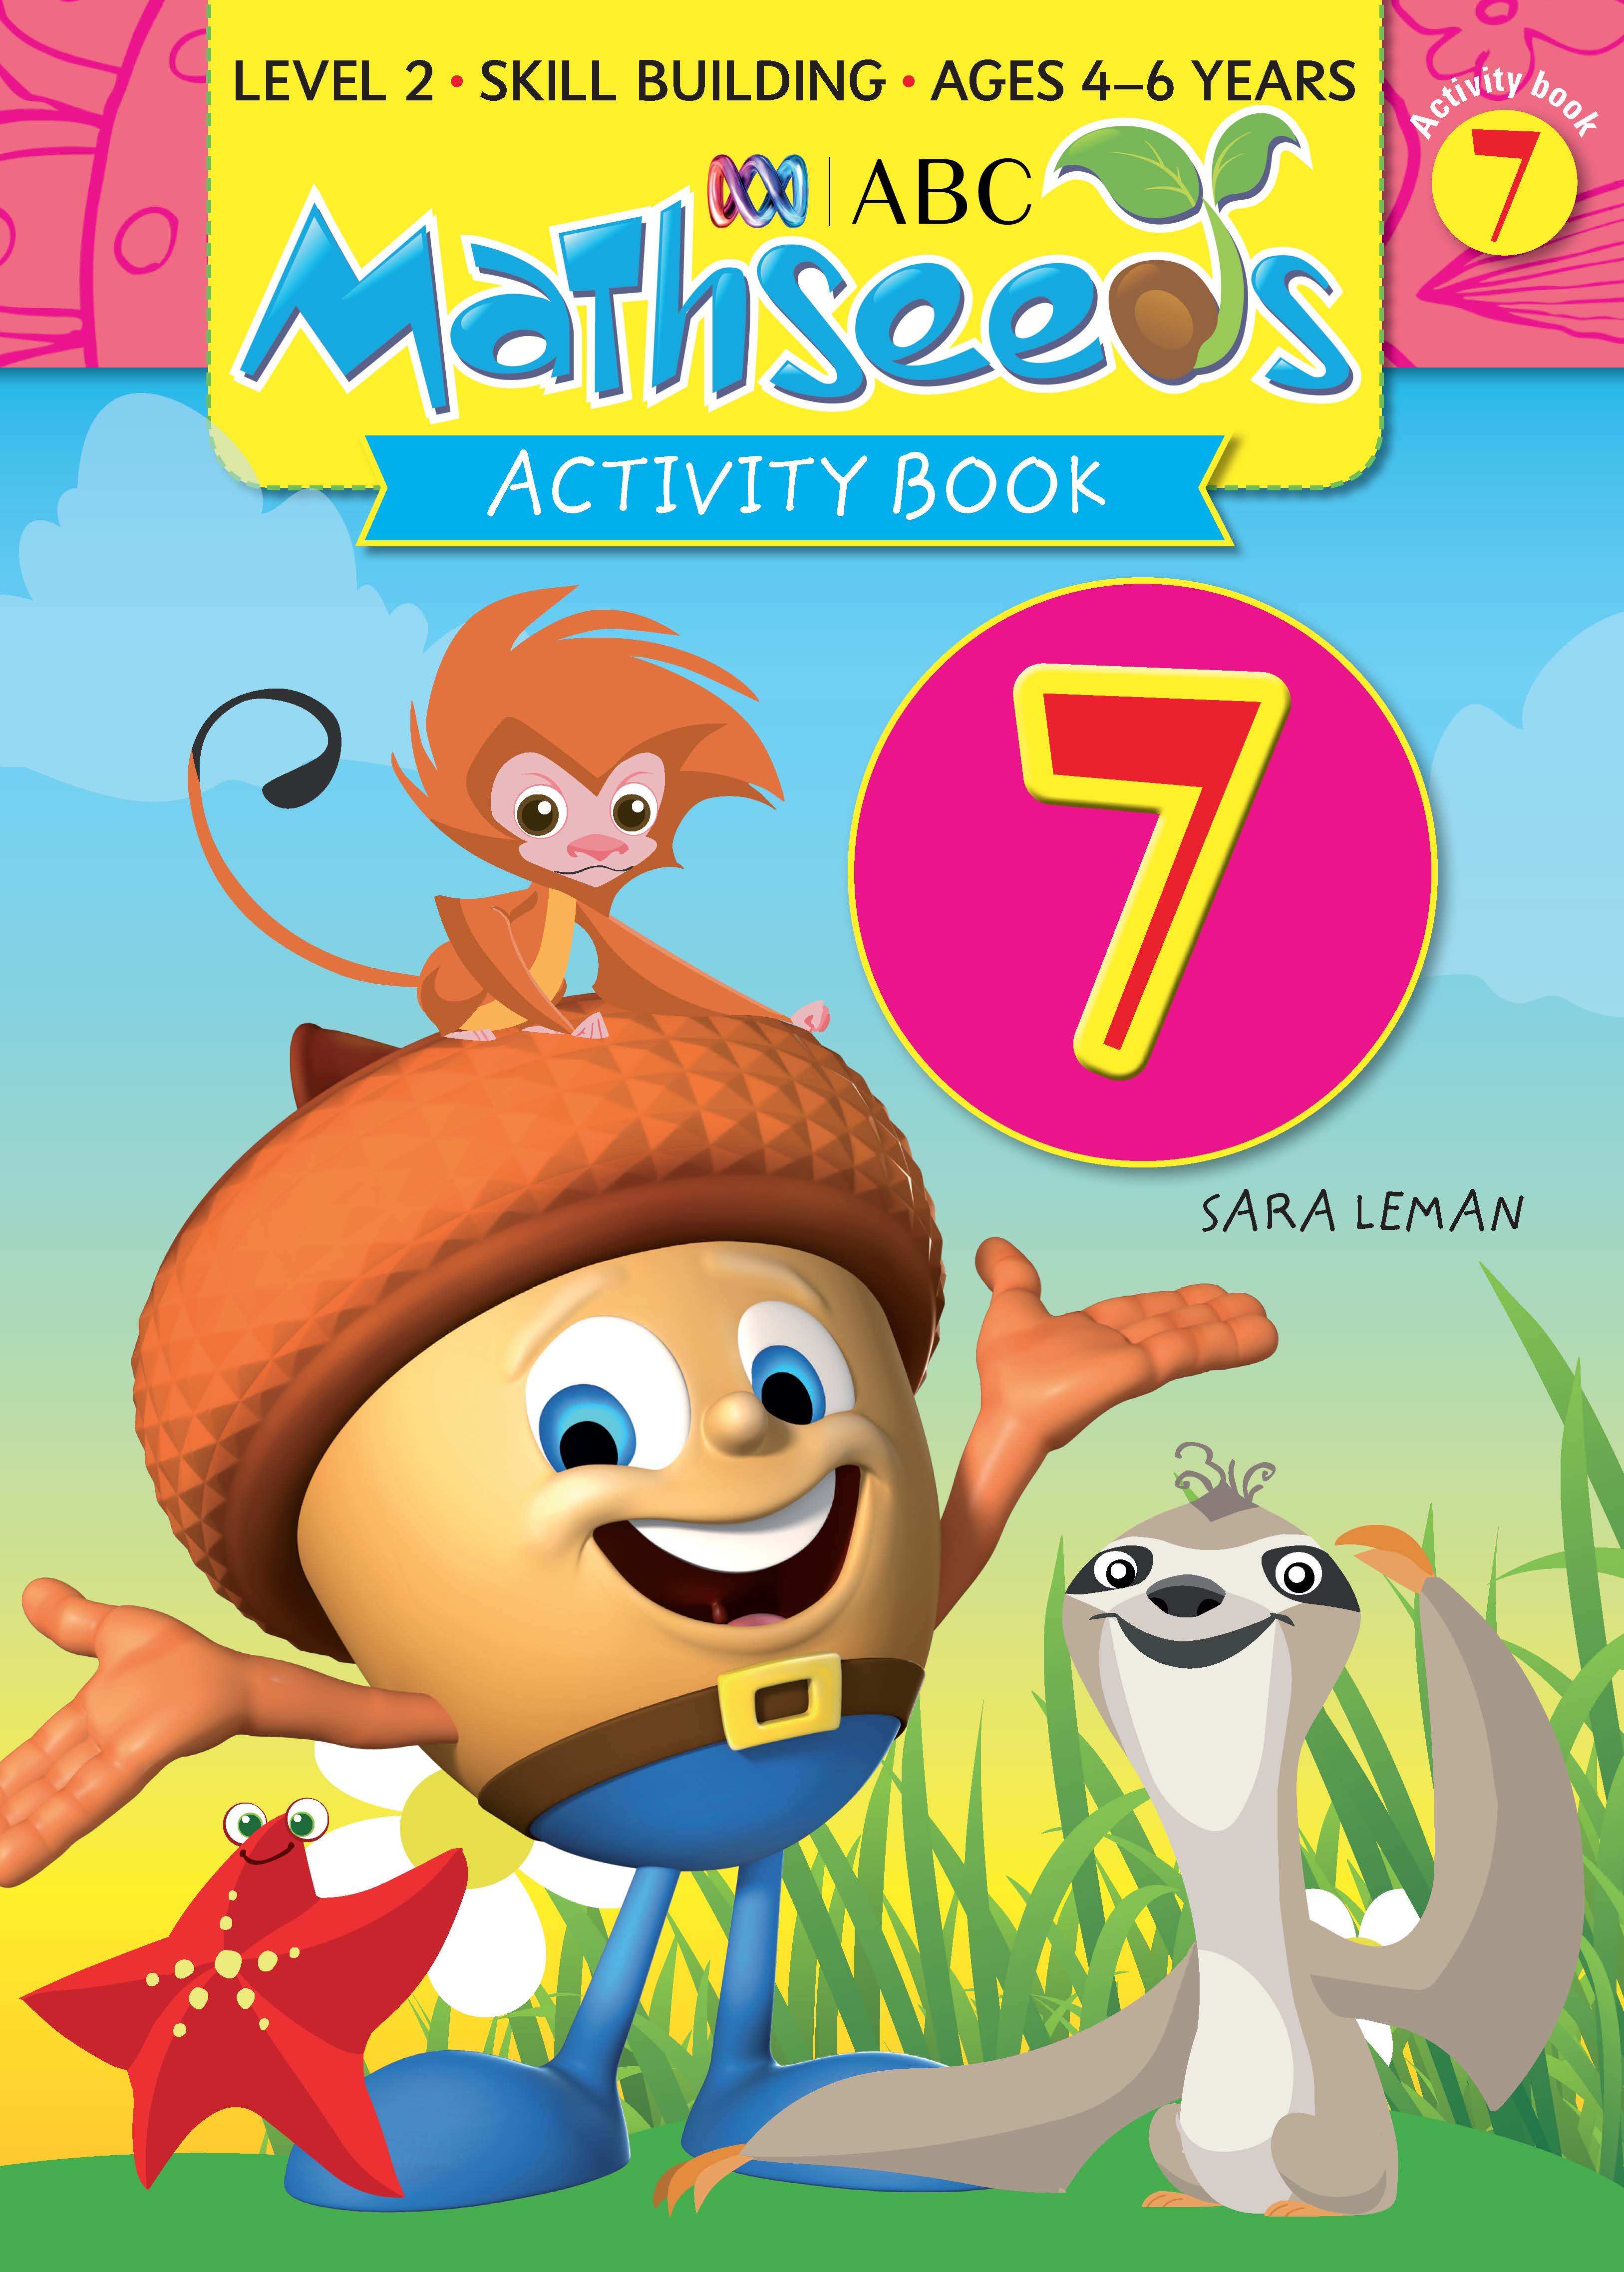 Picture of ABC Mathseeds Activity Book 7 Level 2 Ages 4-6